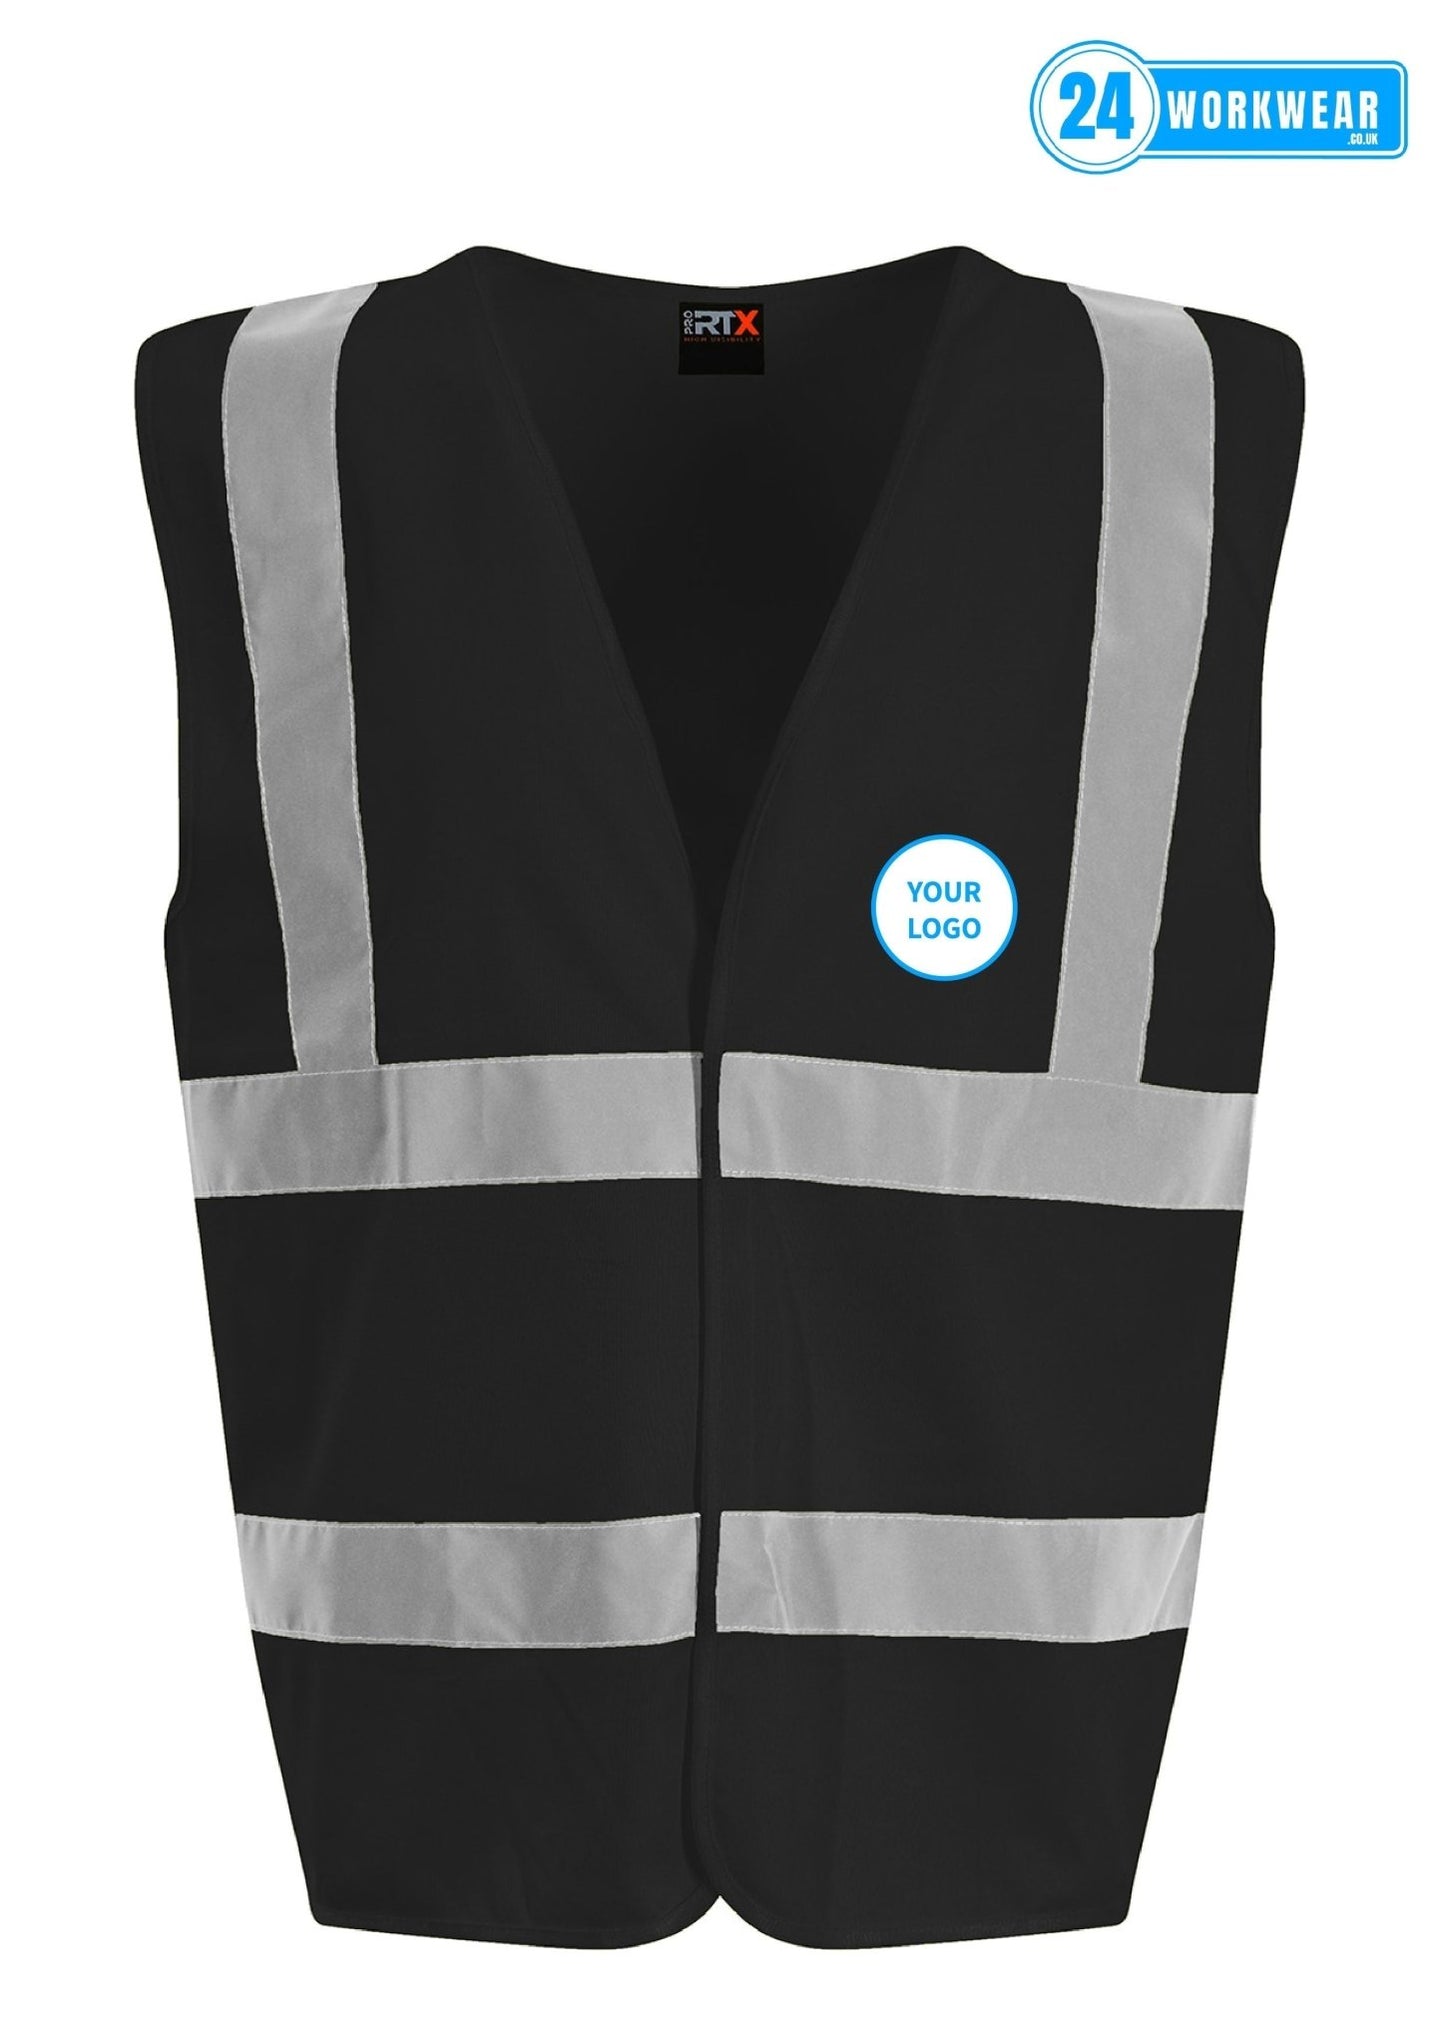 100 x High Visibility Waistcoat Deal - 24 Workwear - High Visibility